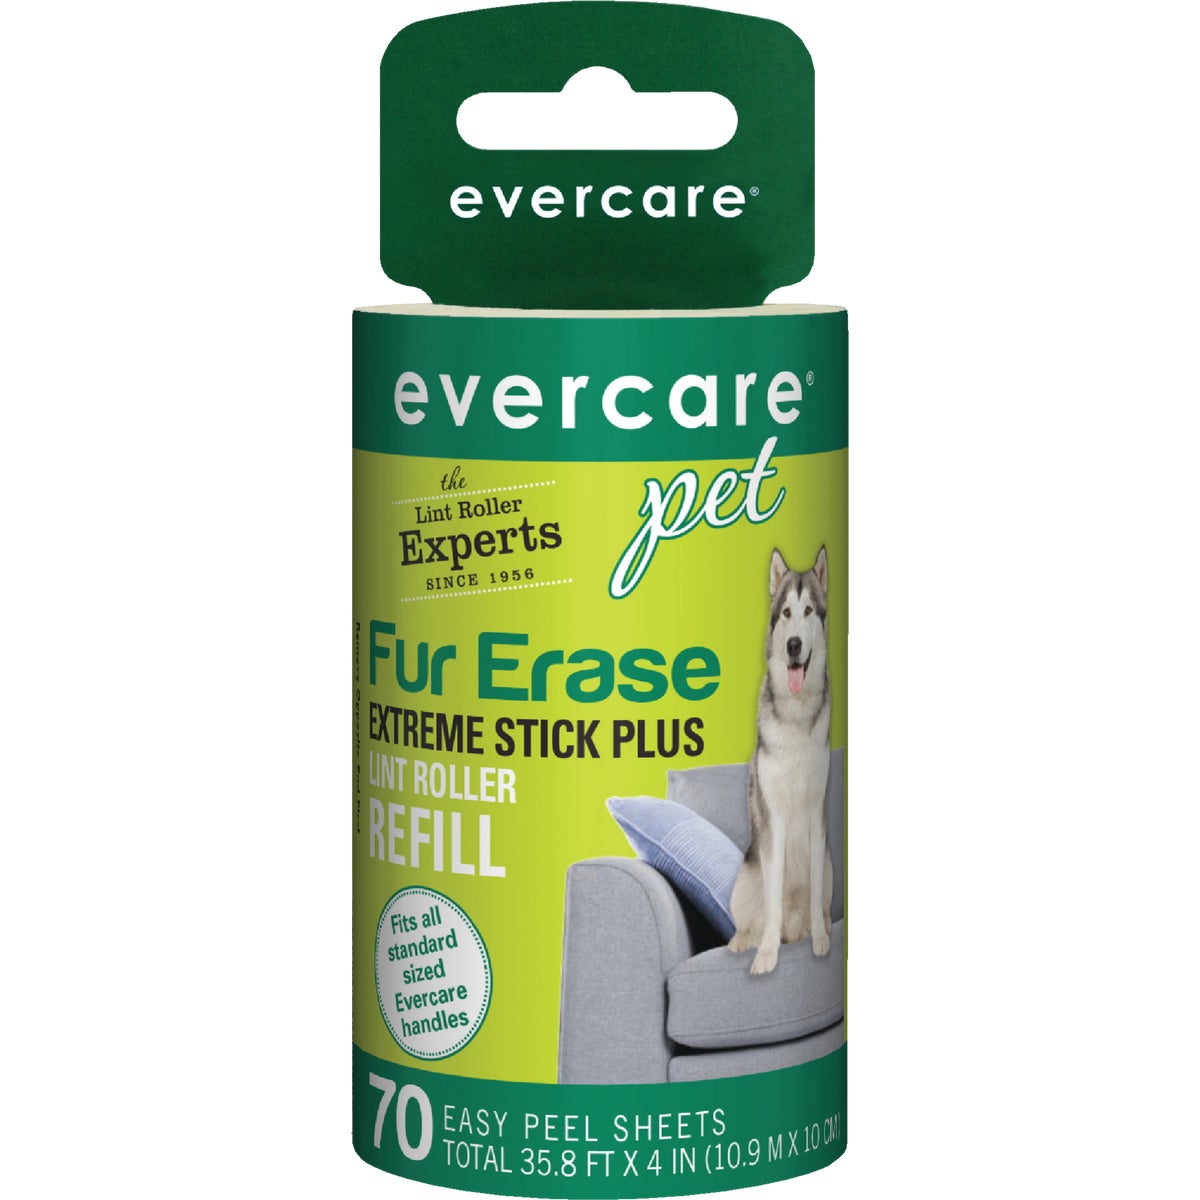 Evercare Pet Fur Erase Extreme Stick Plus 35.8 Ft. x 4 In. Refill Roll Pet Hair Remover